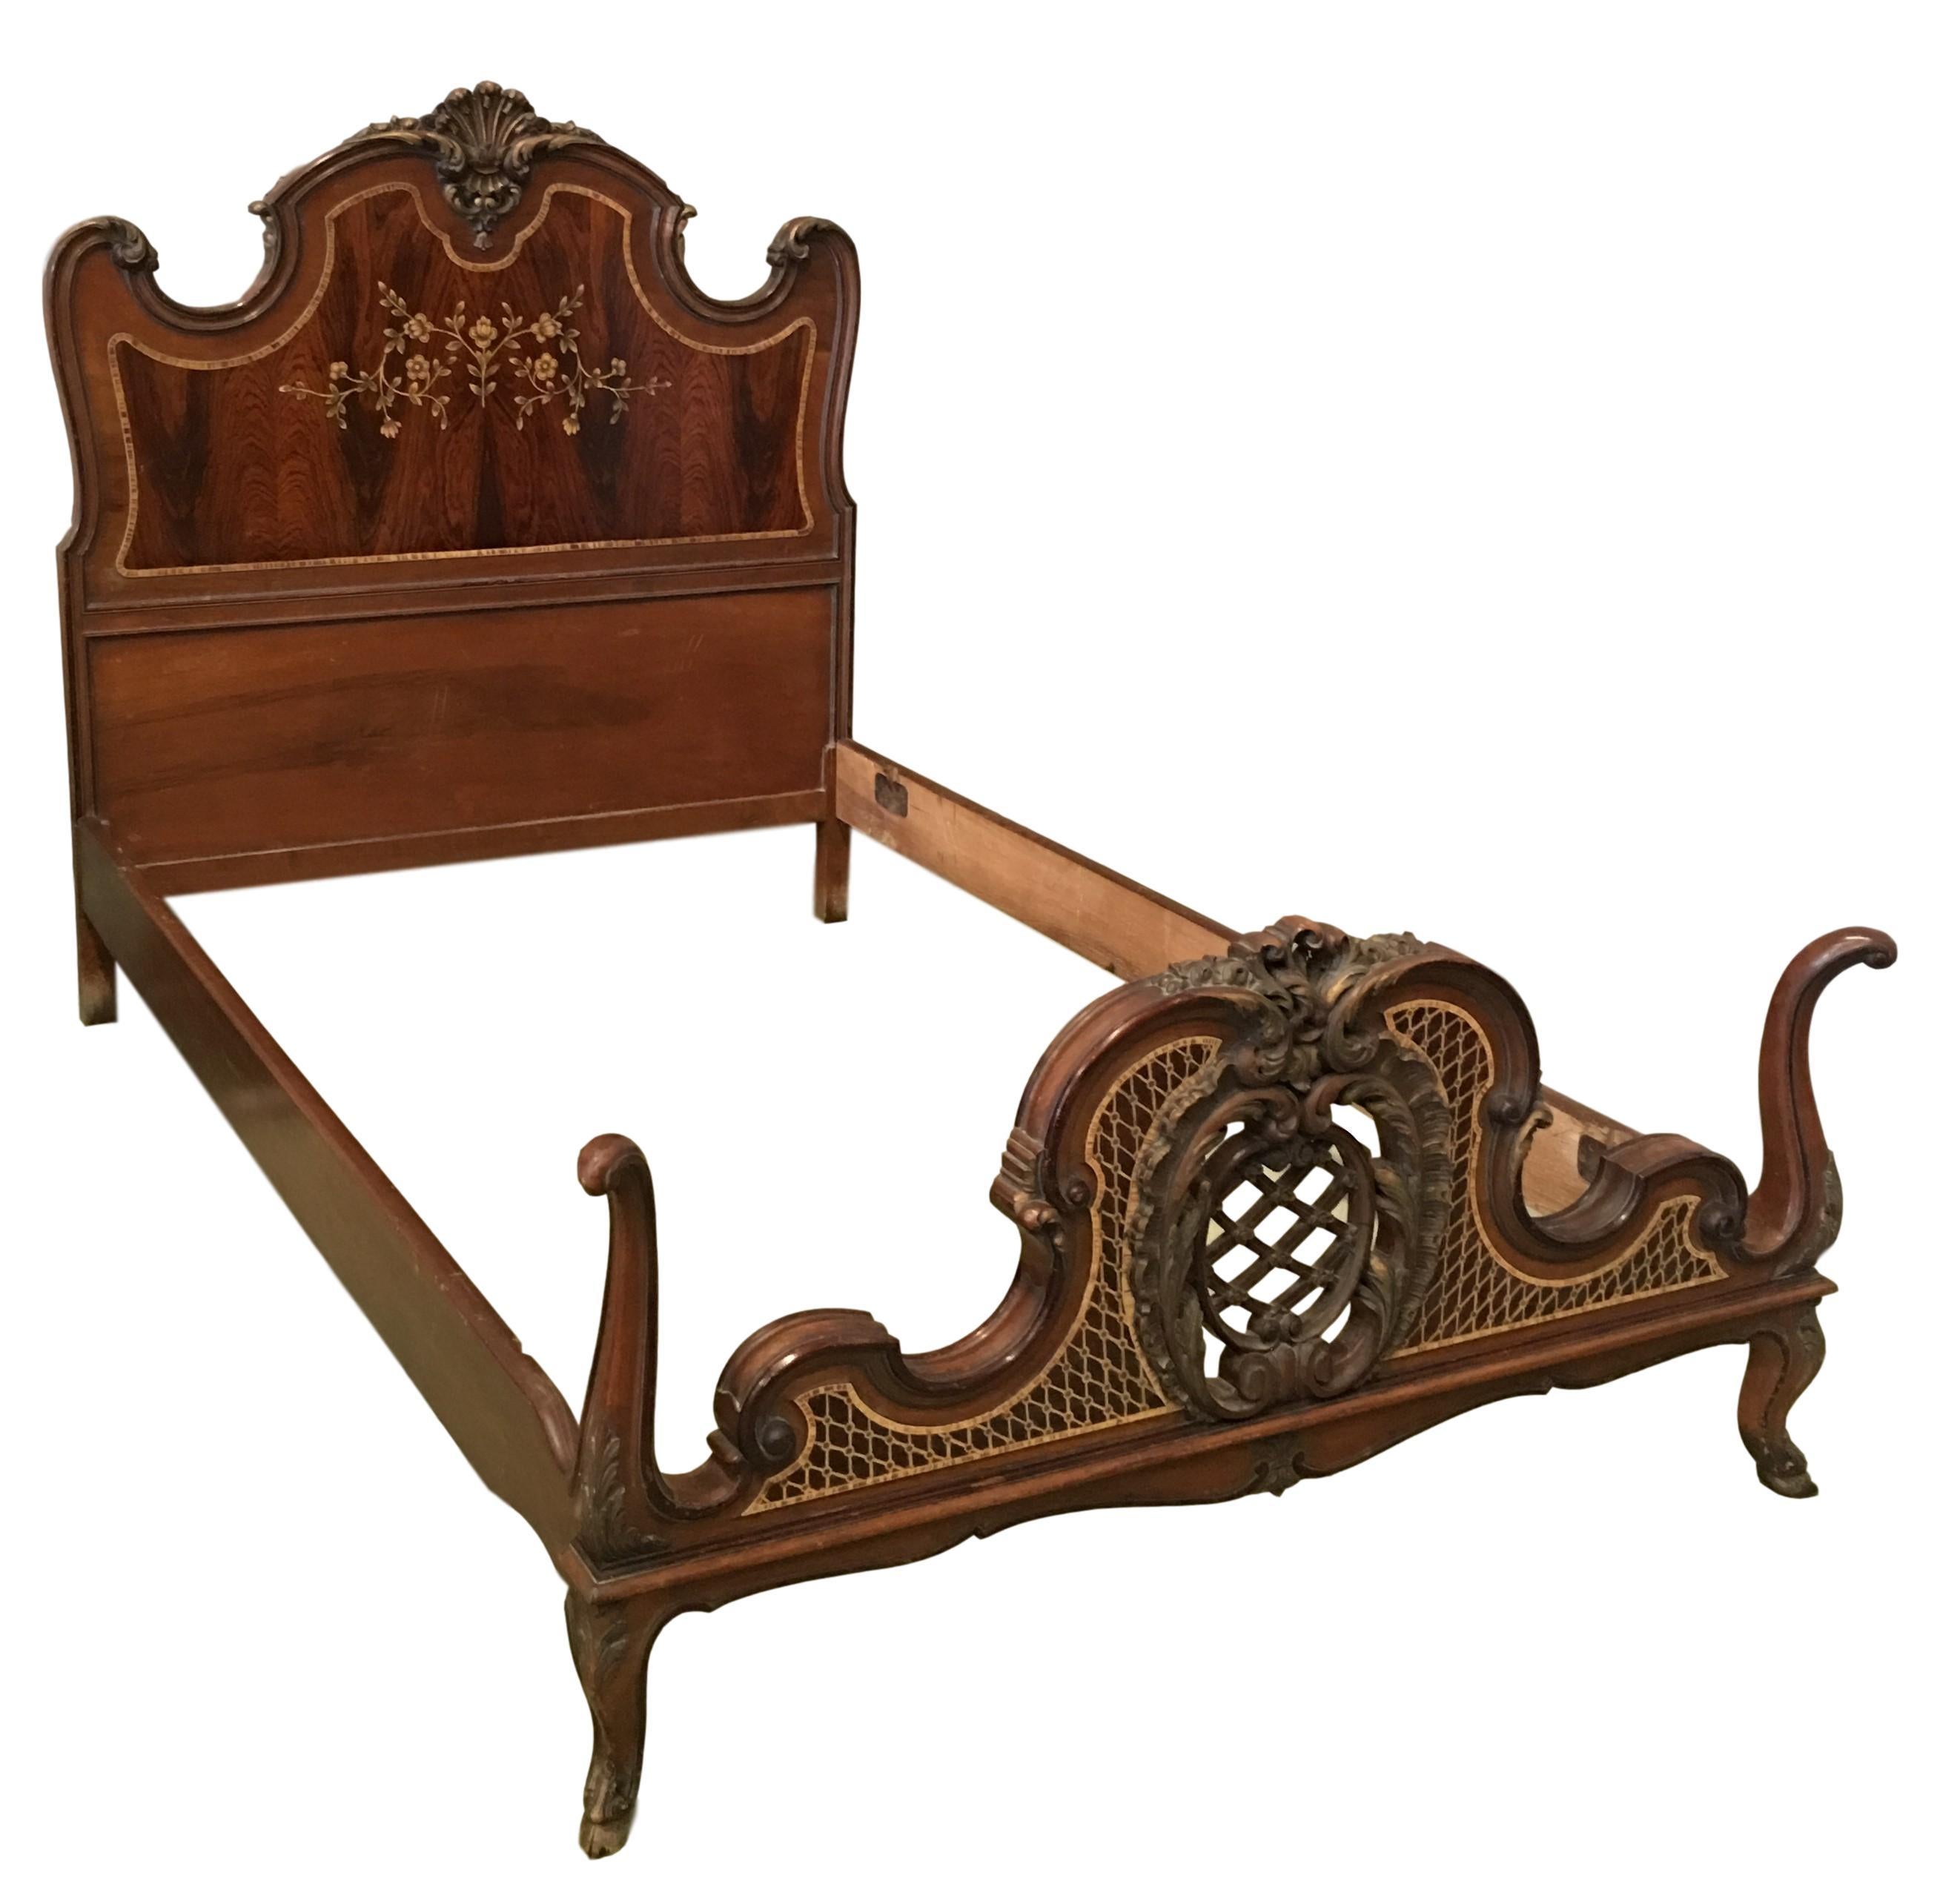 1930s Venetian Baroque Pair Beds Marquetry and Carved Walnut

